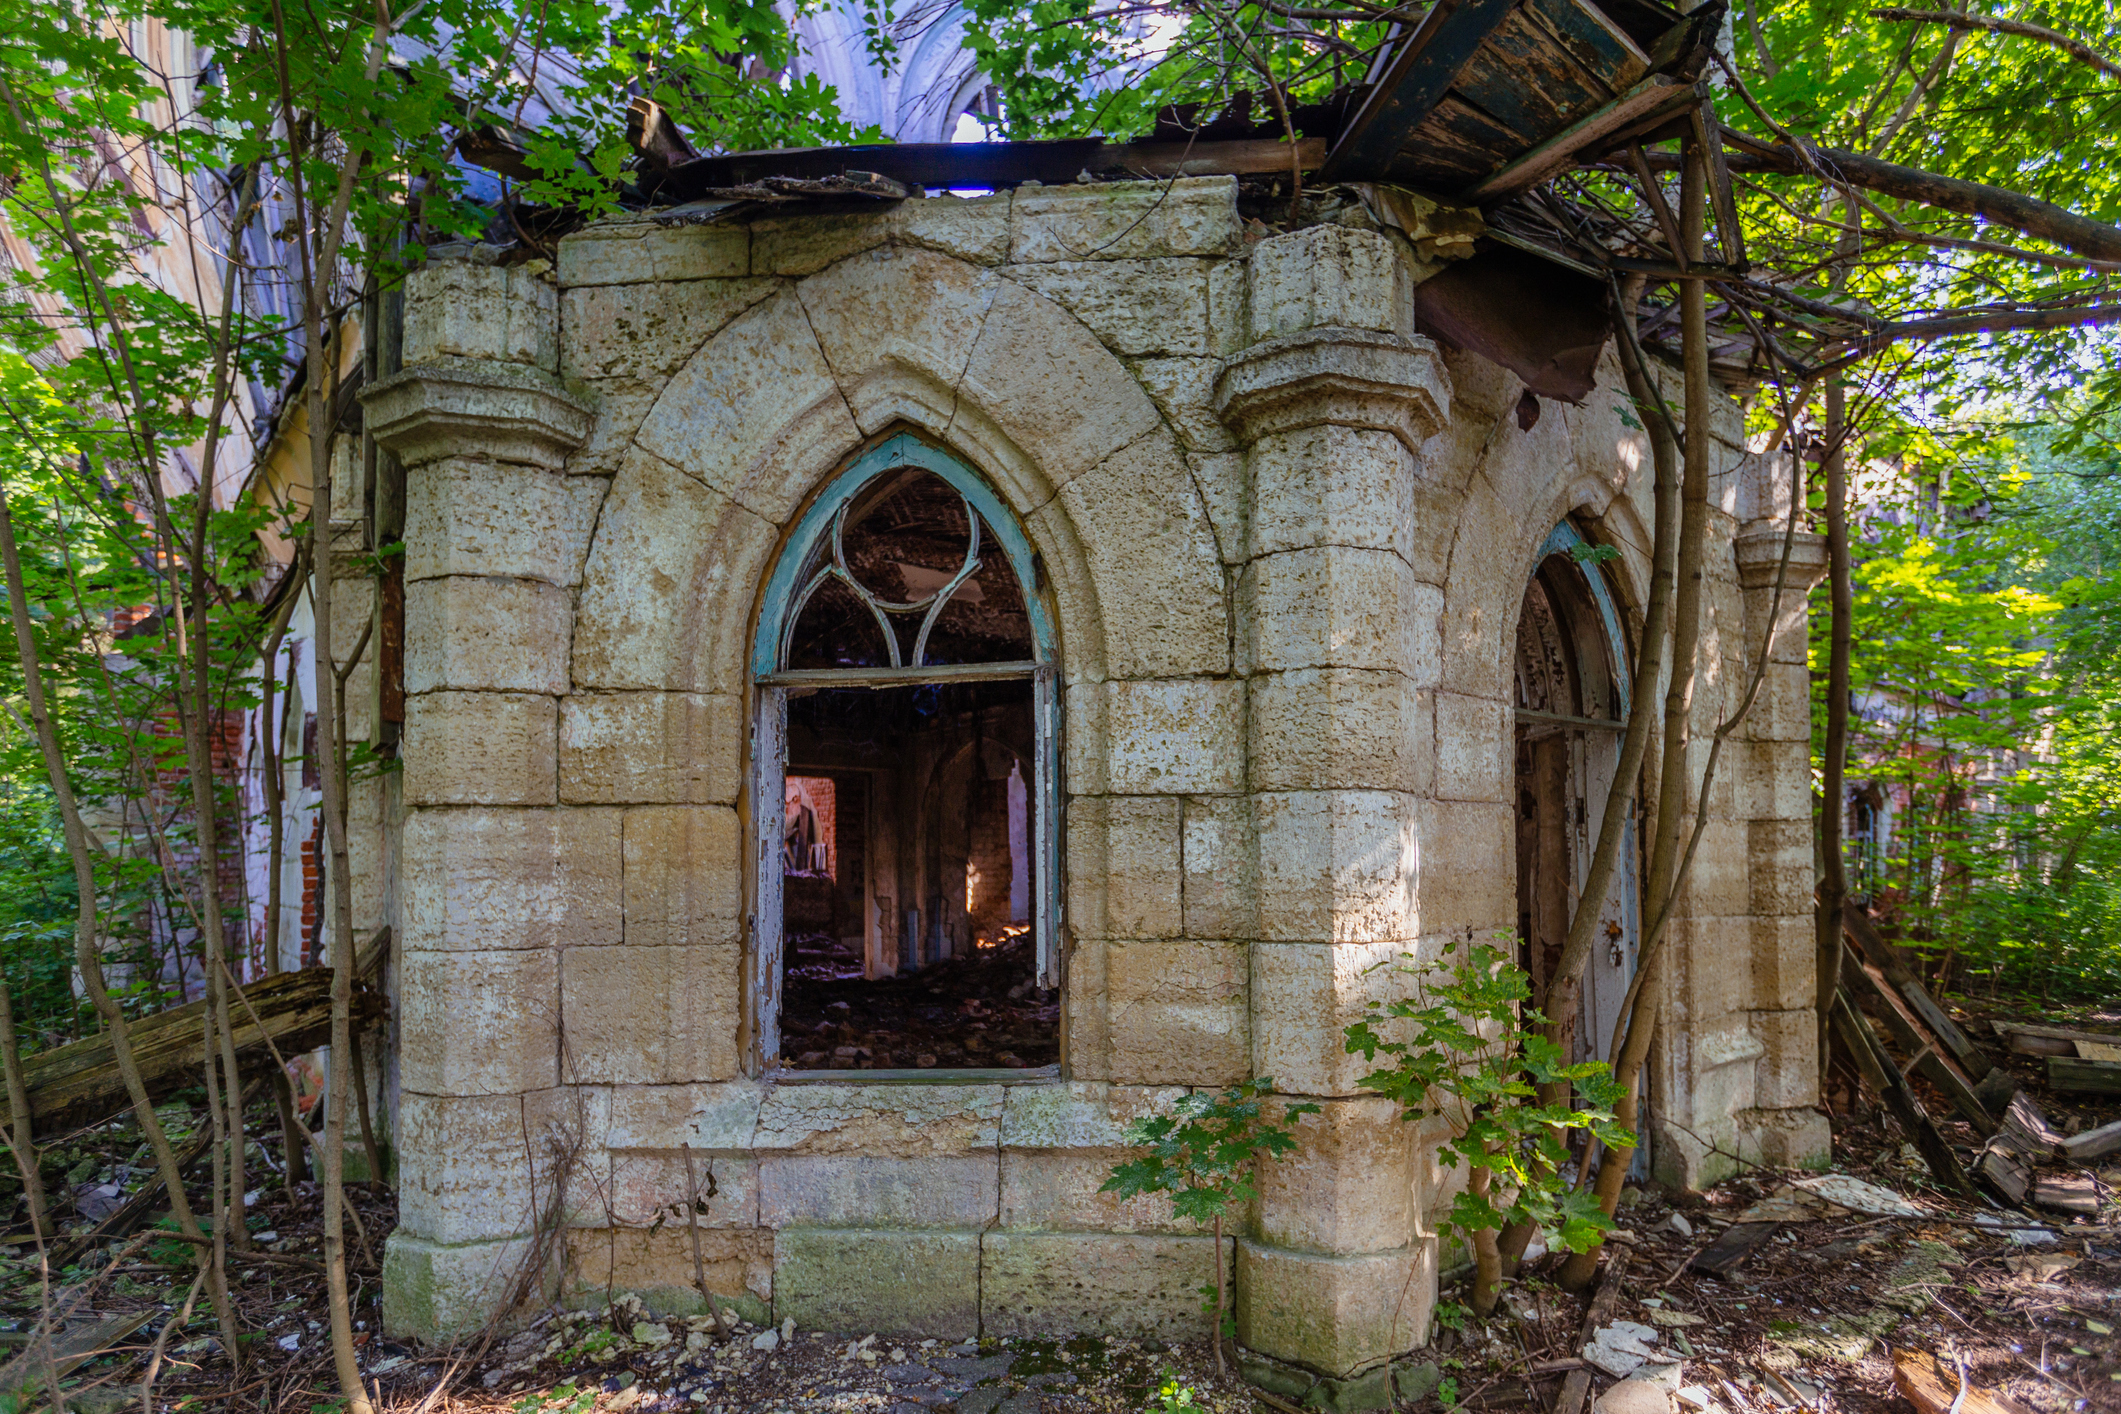 Inside old ruined abandoned historical mansion in Gothic style